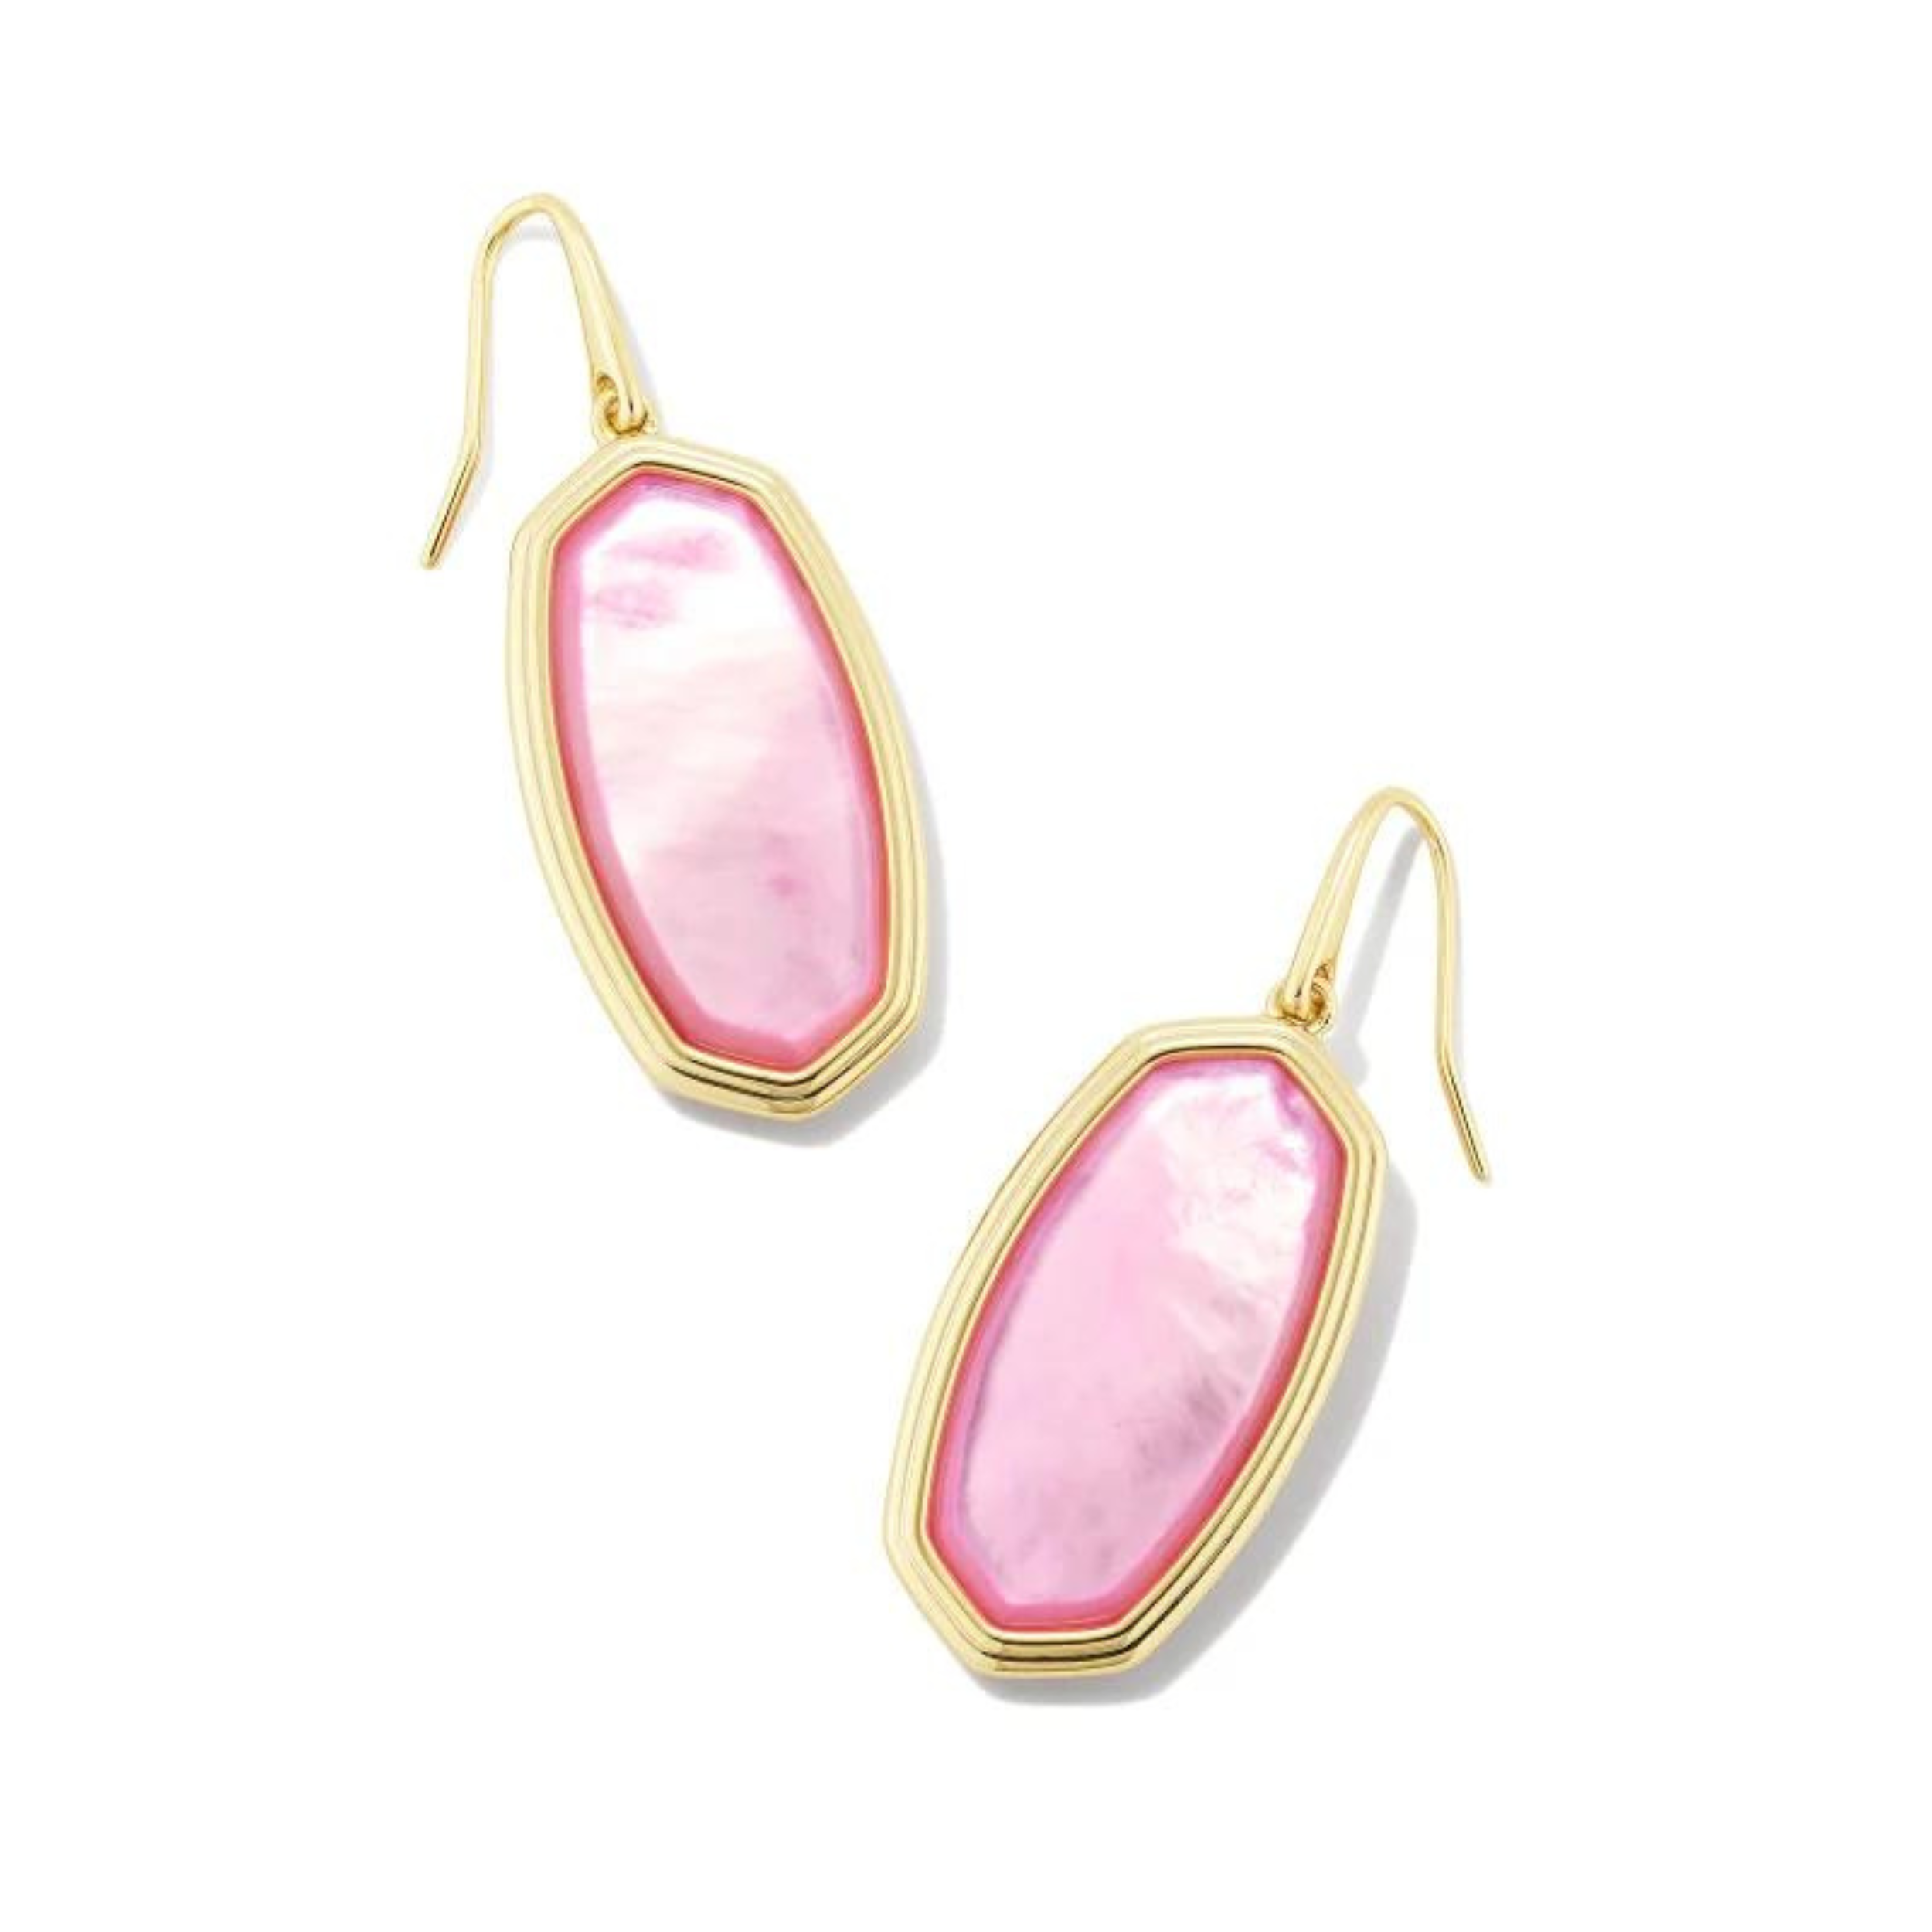 Gold dangle earrings with peony mother of pearl stones, pictured on a white background.